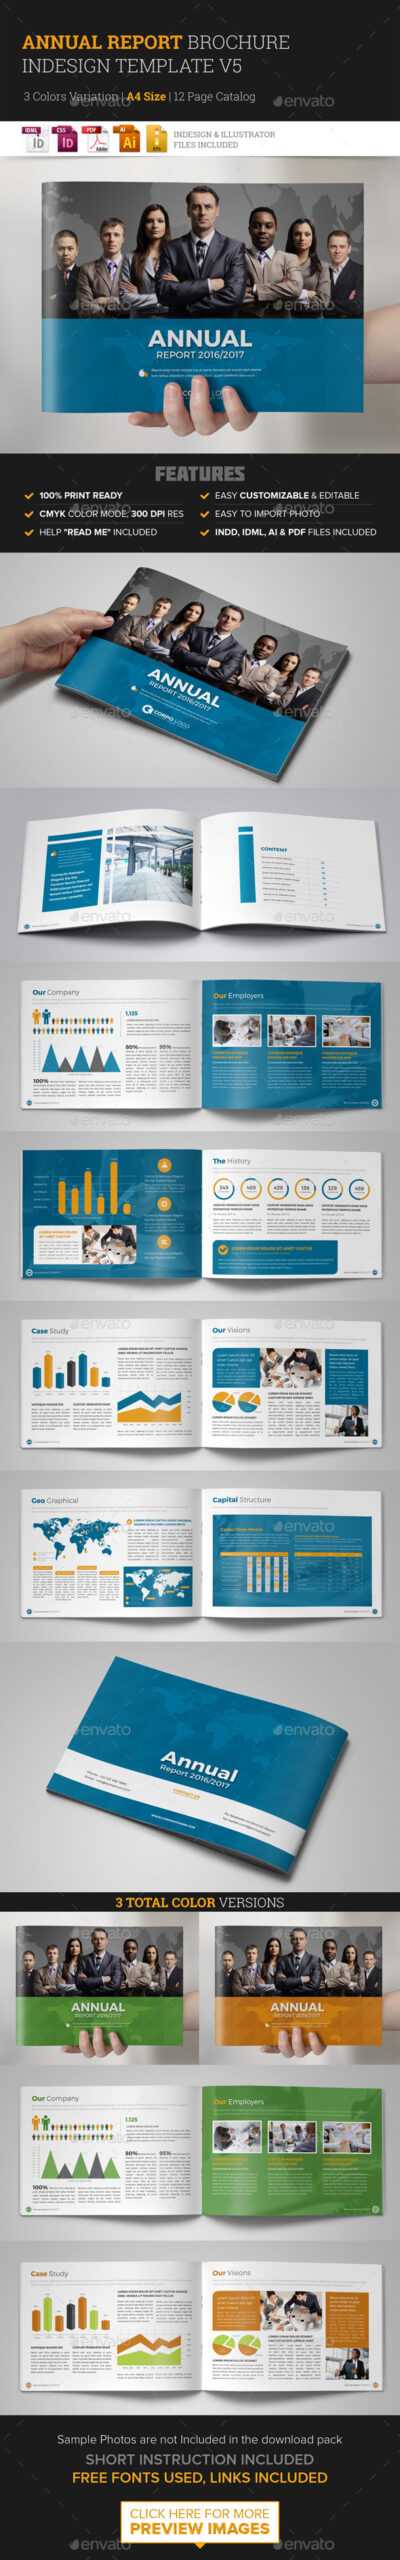 Annual Report Template Indesign Graphics, Designs & Templates Inside Free Annual Report Template Indesign